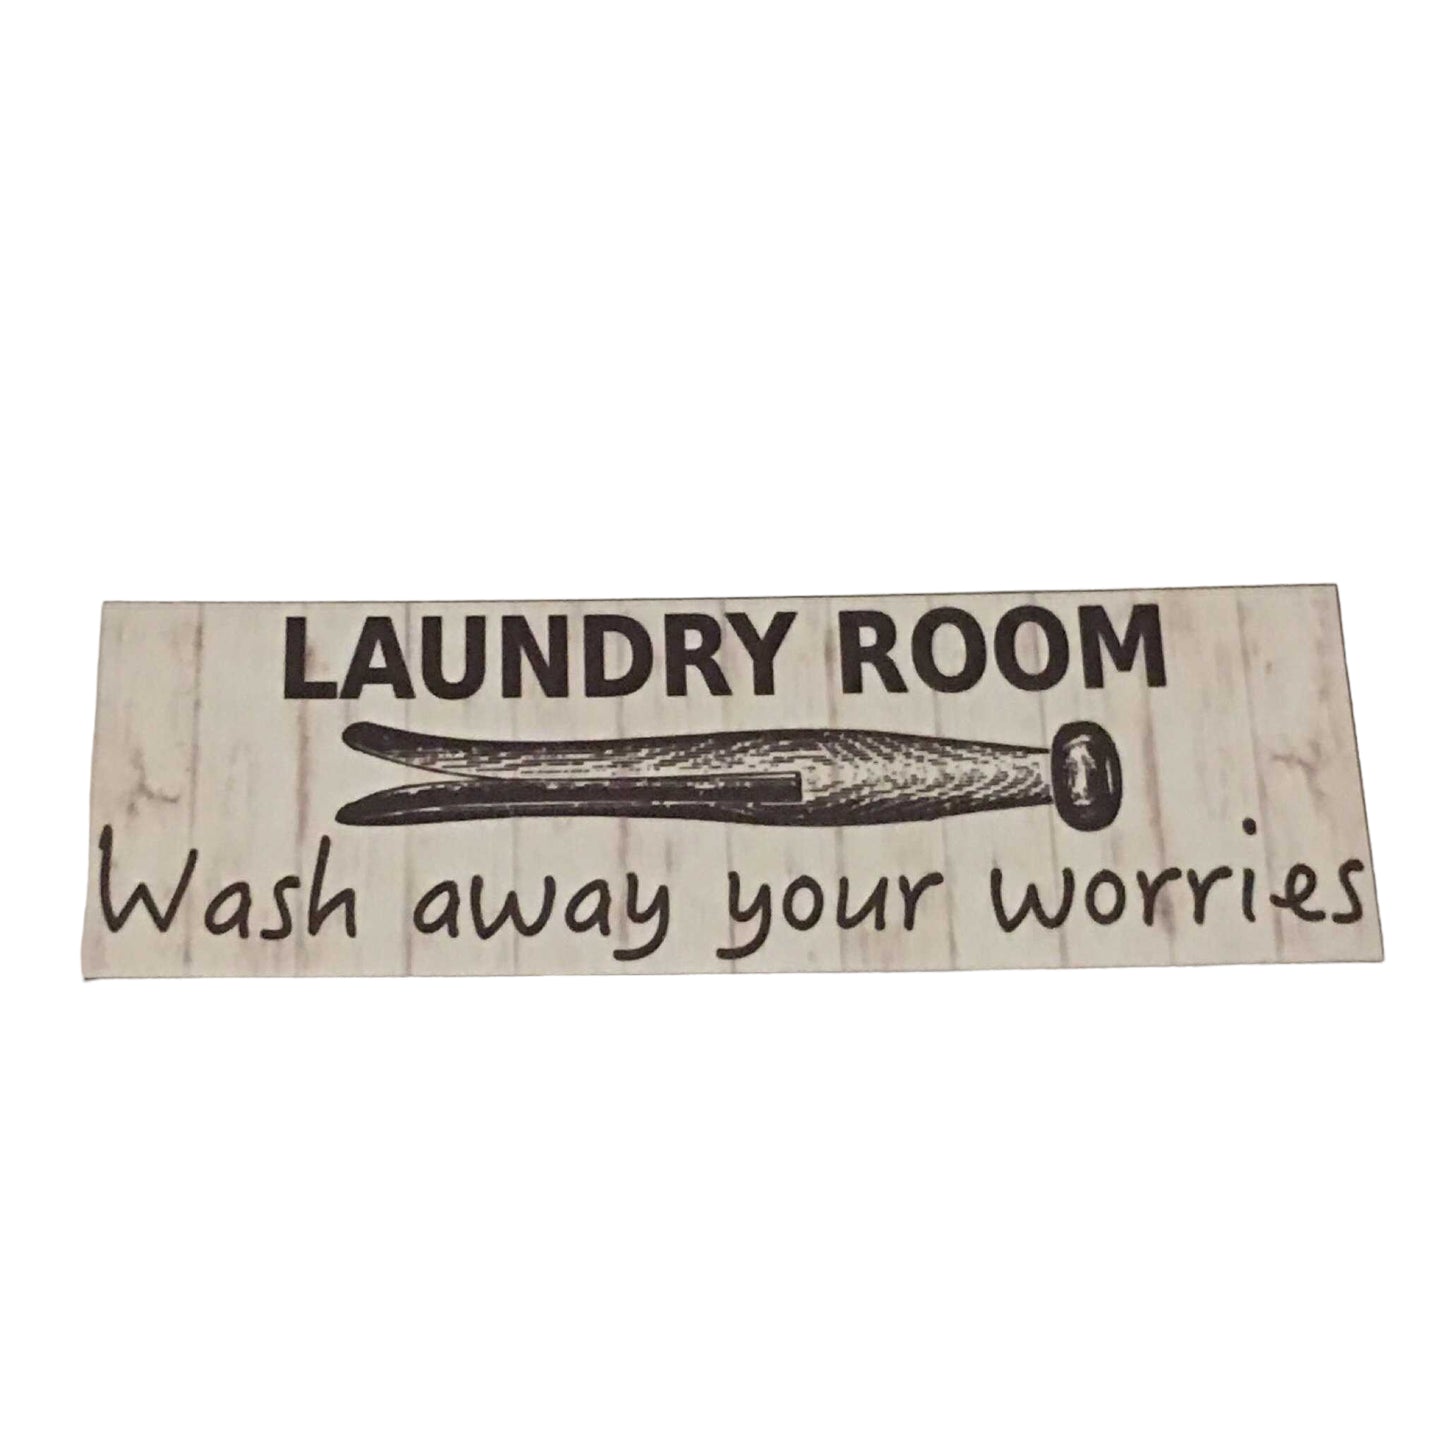 Laundry Room Wash Away Your Worries Sign